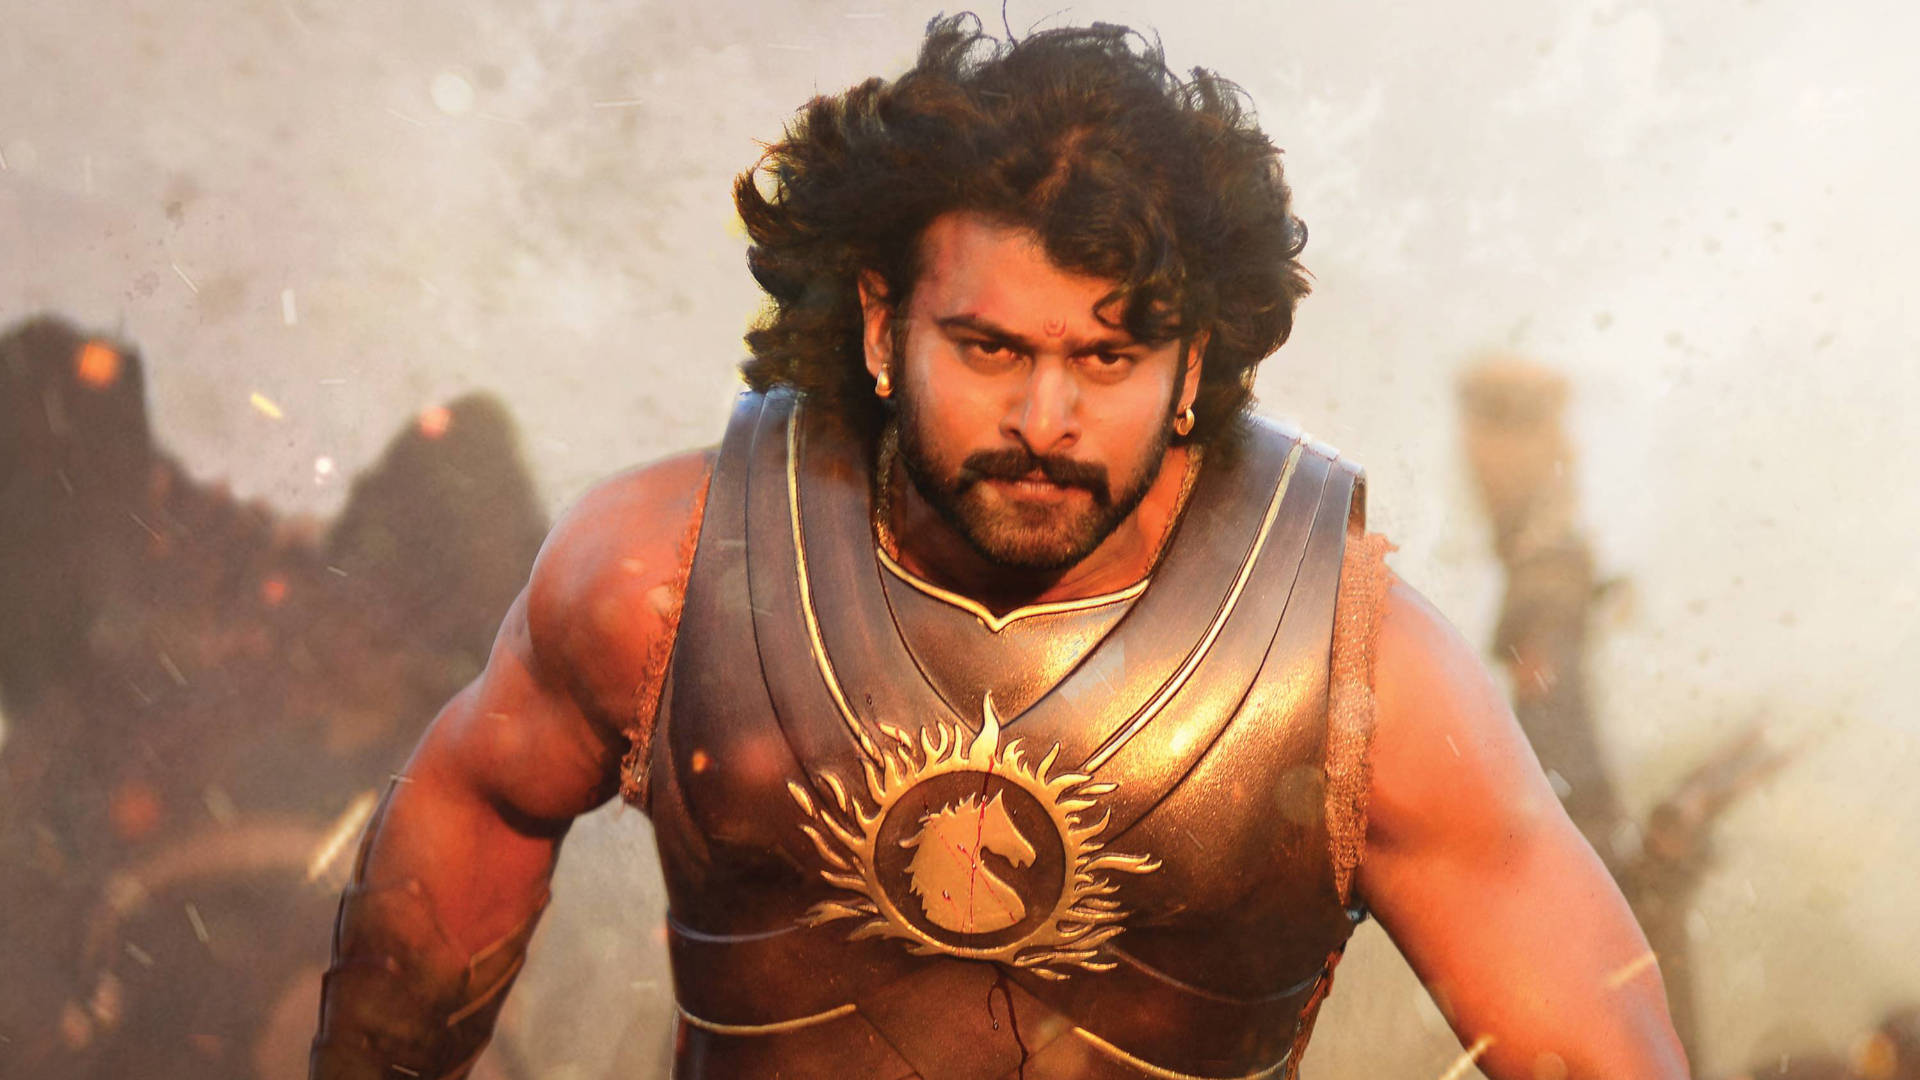 Starkuttryck Prabhas (note: This Translation May Vary, As There Is Not A Direct Translation For The English Words 